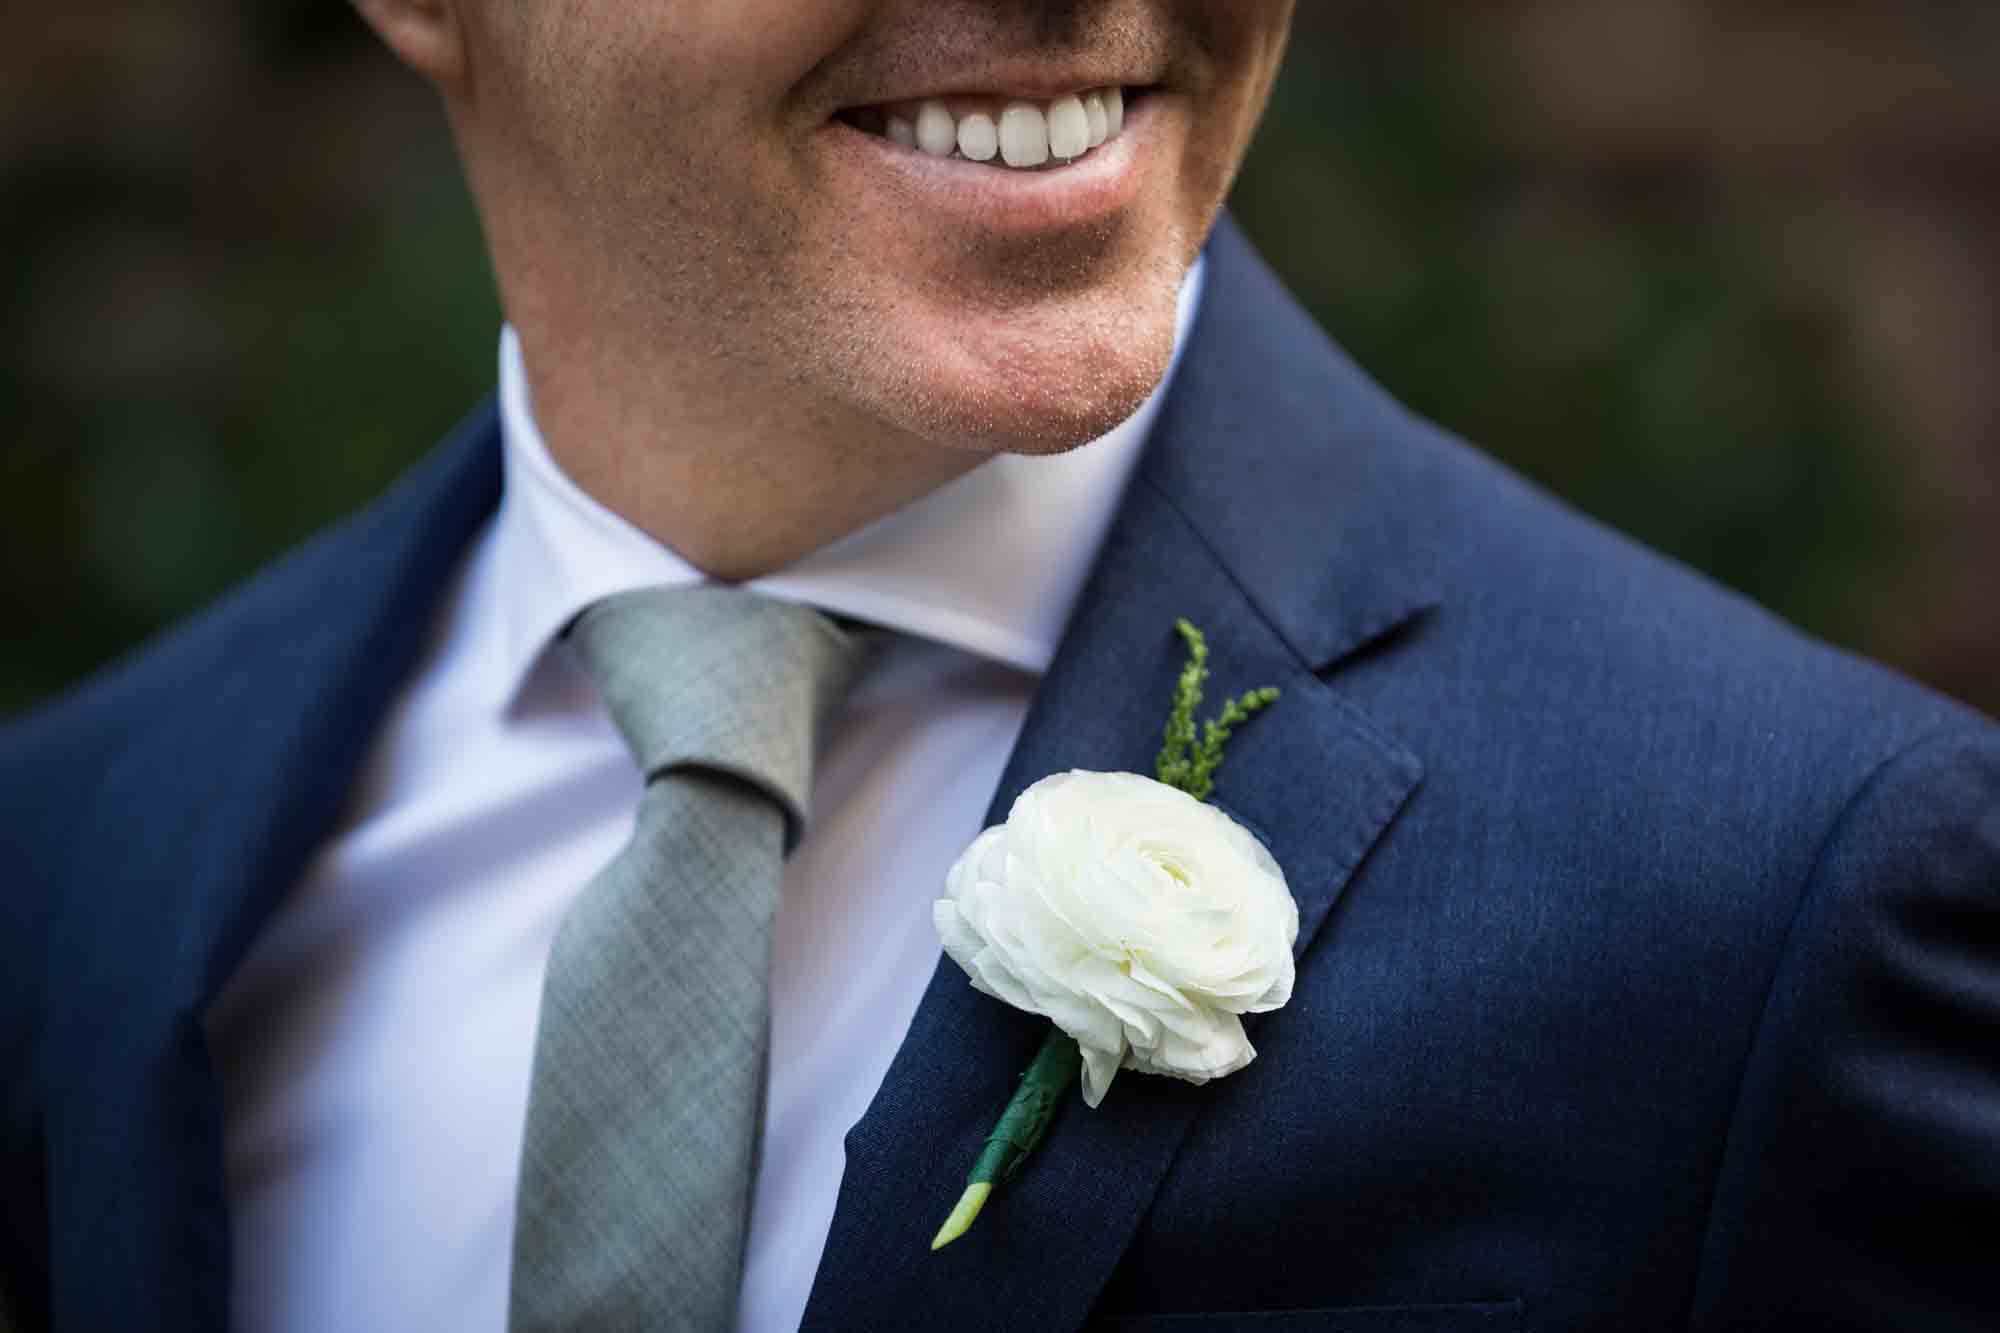 Close up on smiling groom wearing white flower boutonnière